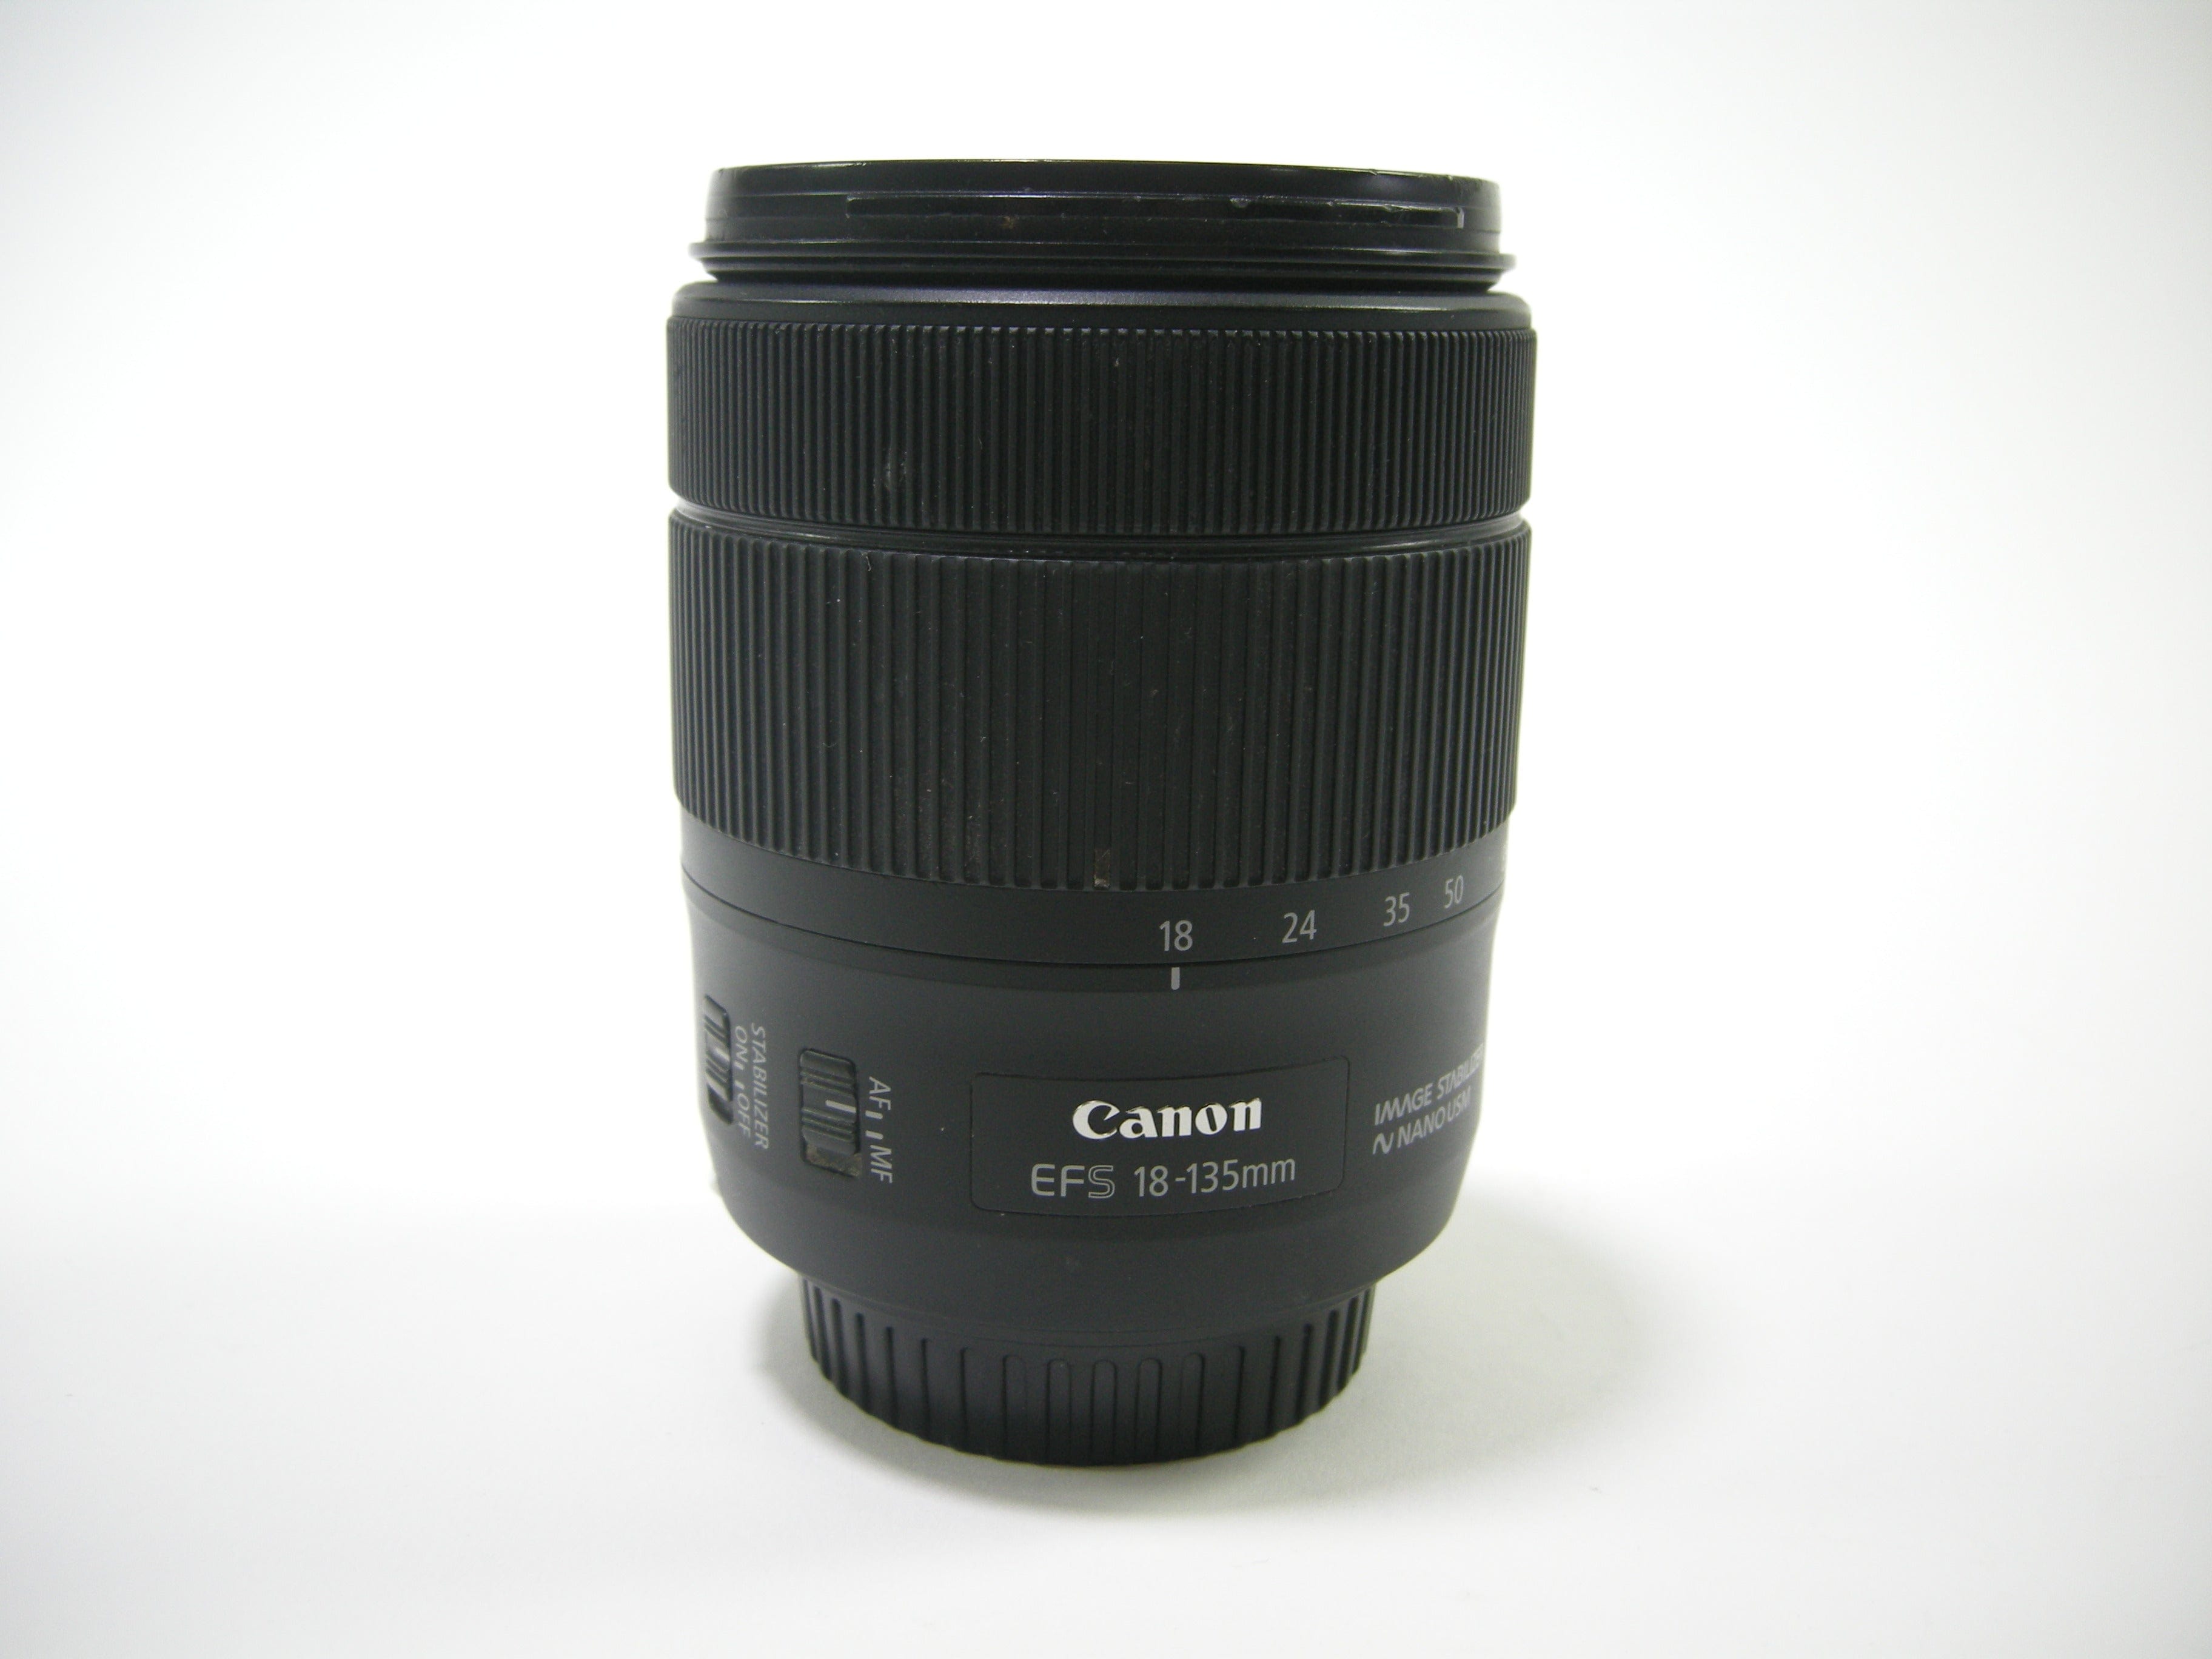 Canon EF-S 18-135mm f3.5-5.6 IS USM (Parts) – Camera Exchange